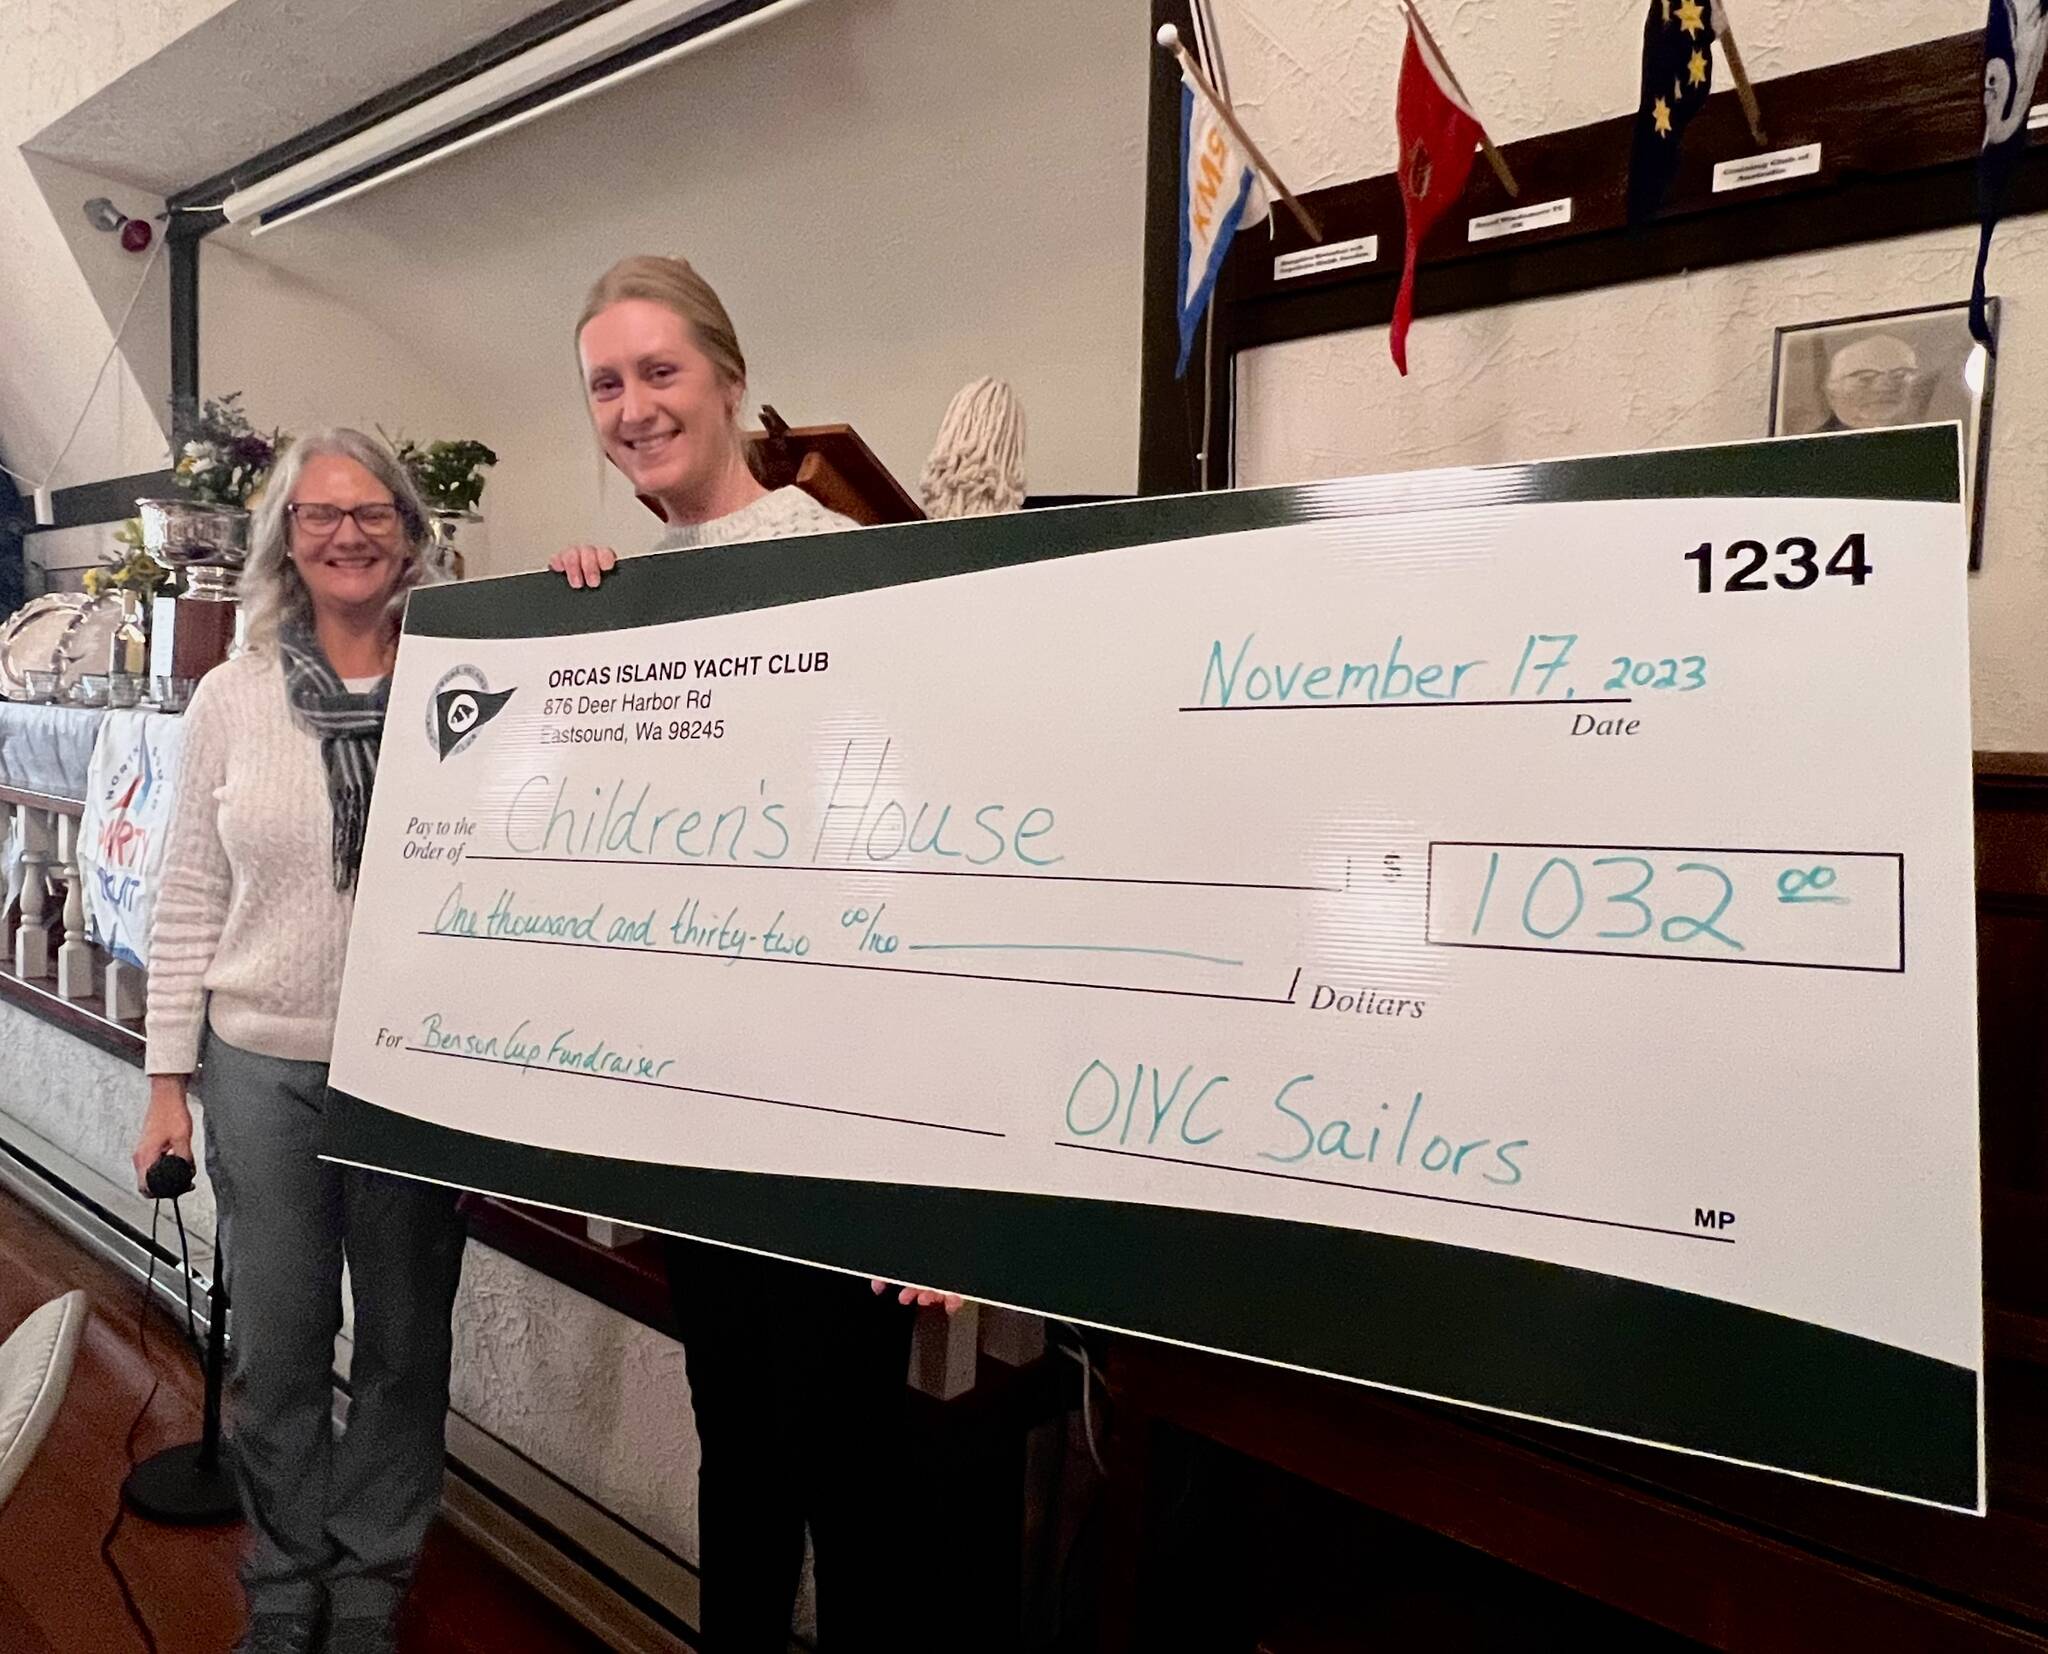 Contributed photo
Orcas Island Yacht Club’s Stephanie Arnold presents a check to Mallory Ballome, Board Member of the Children’s House.